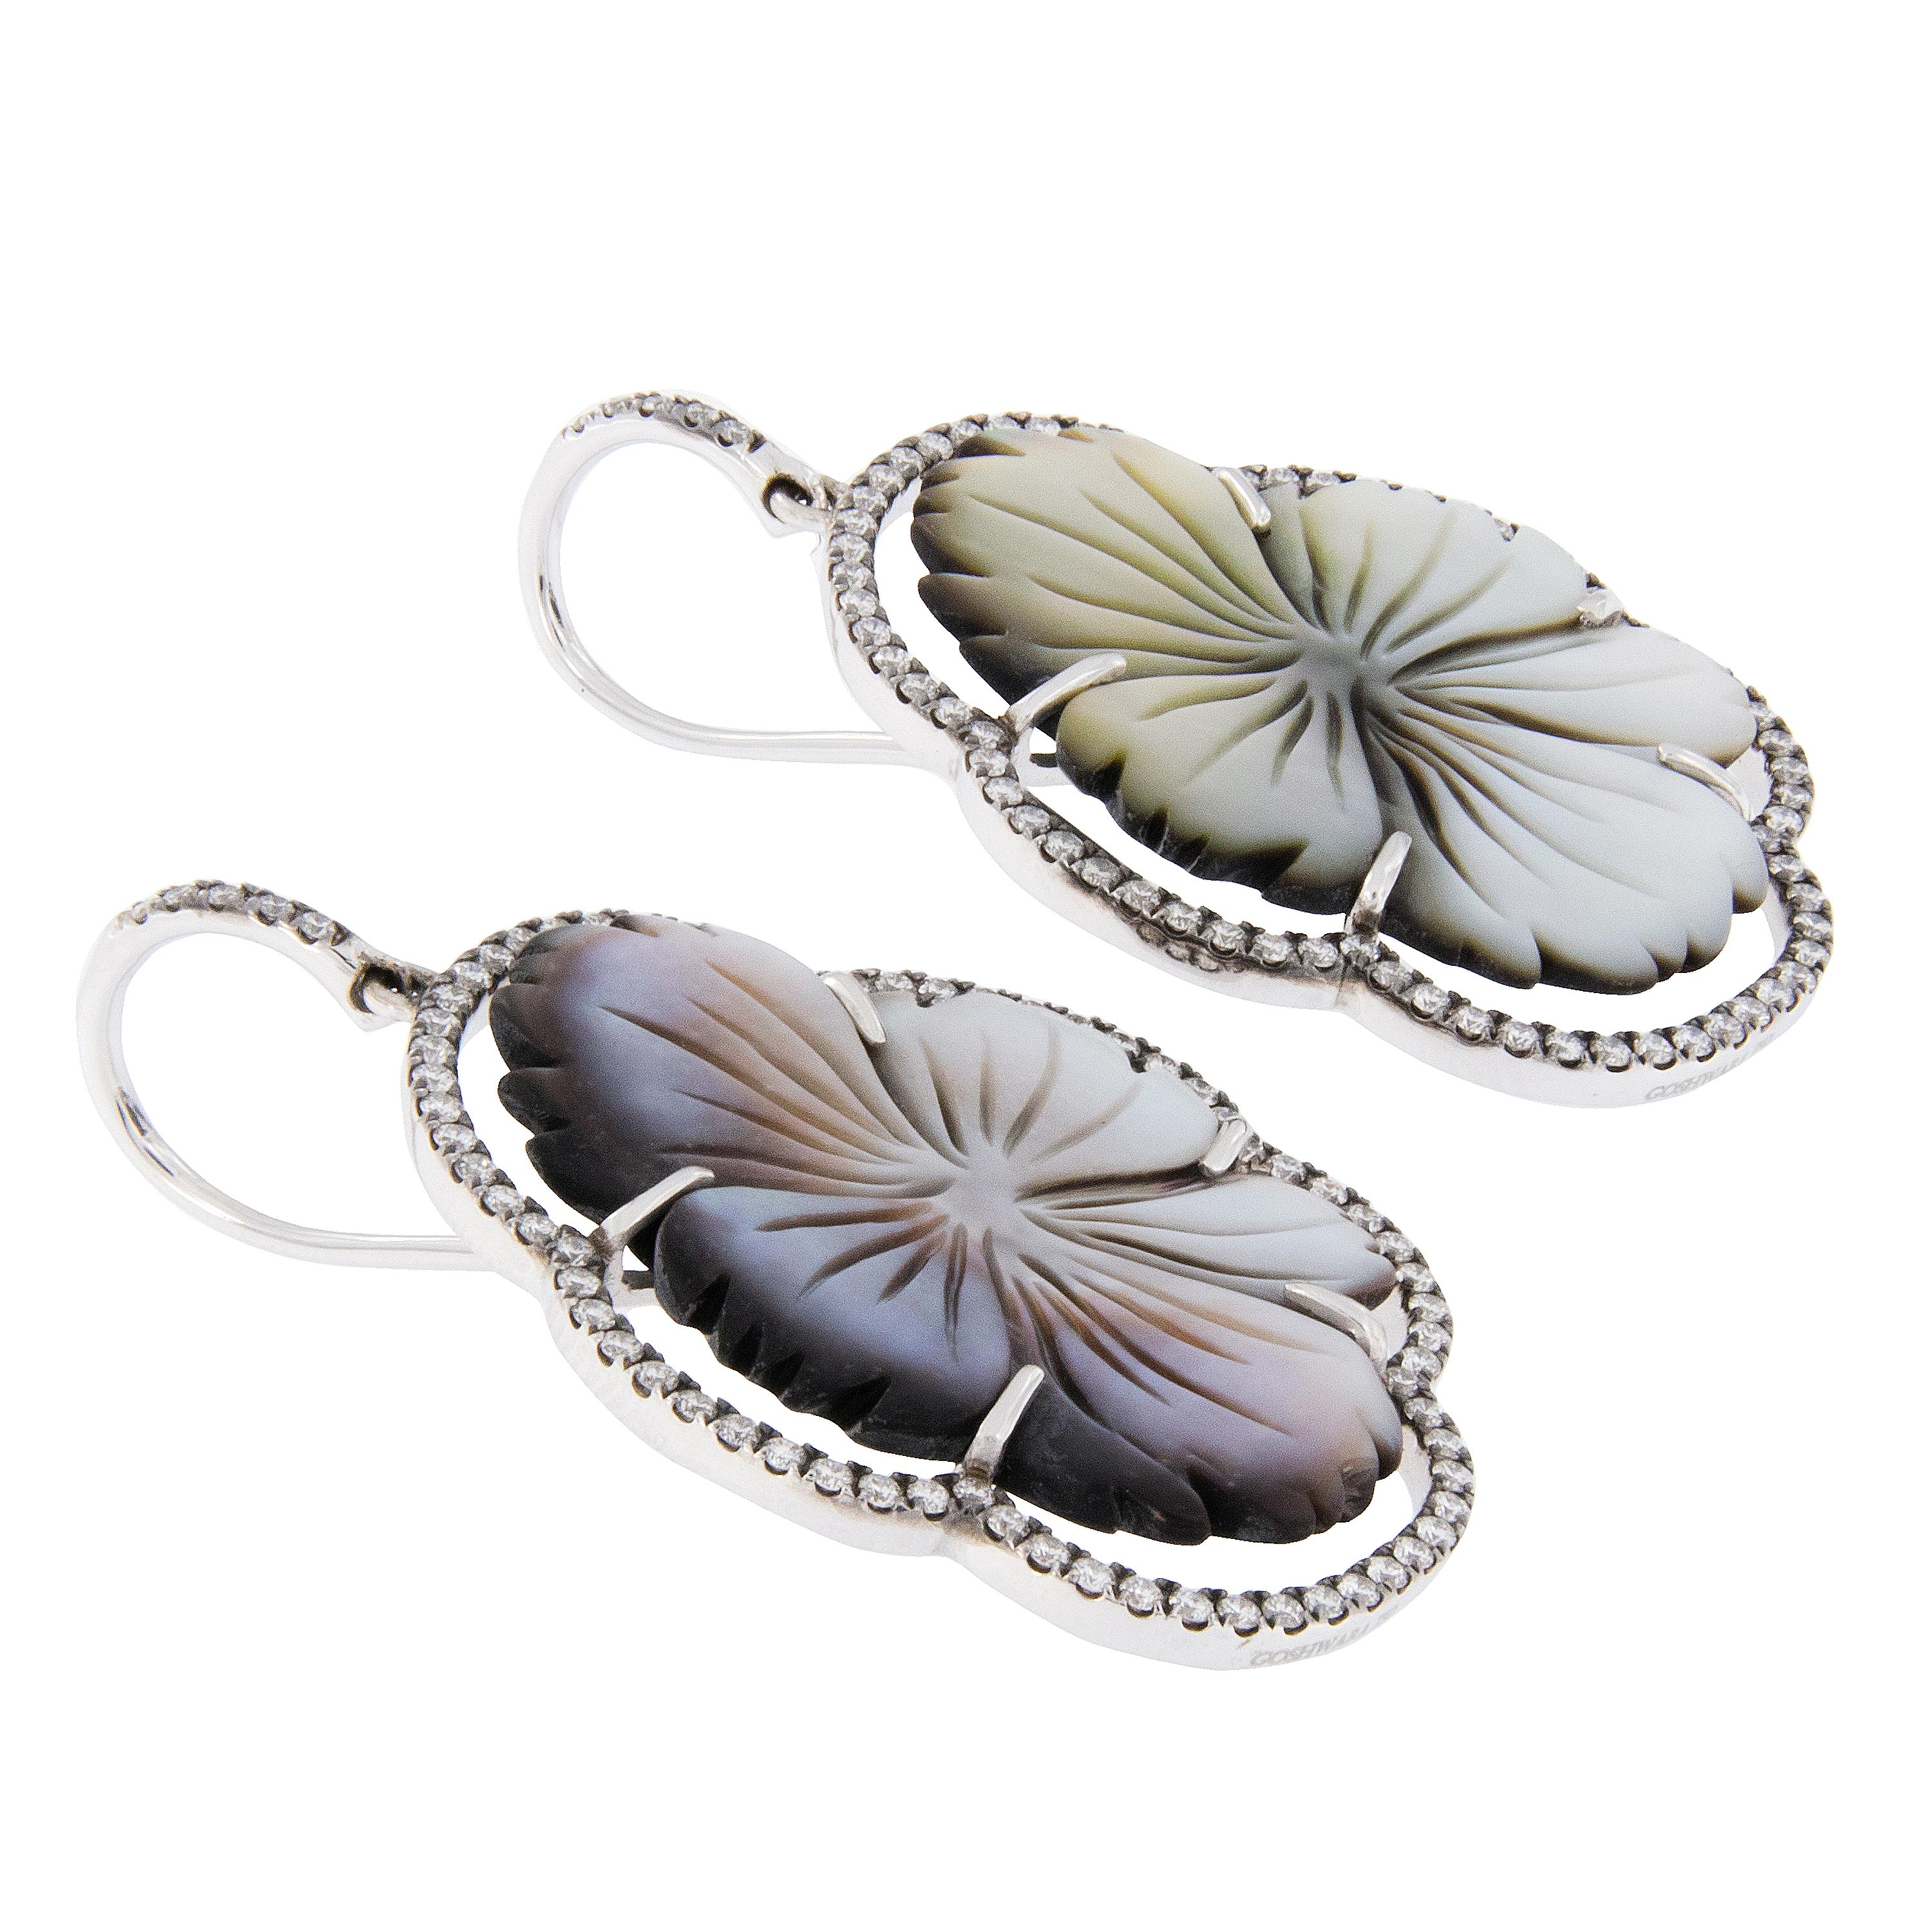 Goshwara, a term for perfect shape, is a company known for exceptional color gems and this 18 karat white gold carved floral earrings with carved grey mother of pearl = 23.86 Cttw & 1.07 Cttw diamonds is no exception! The Innate Collection uses